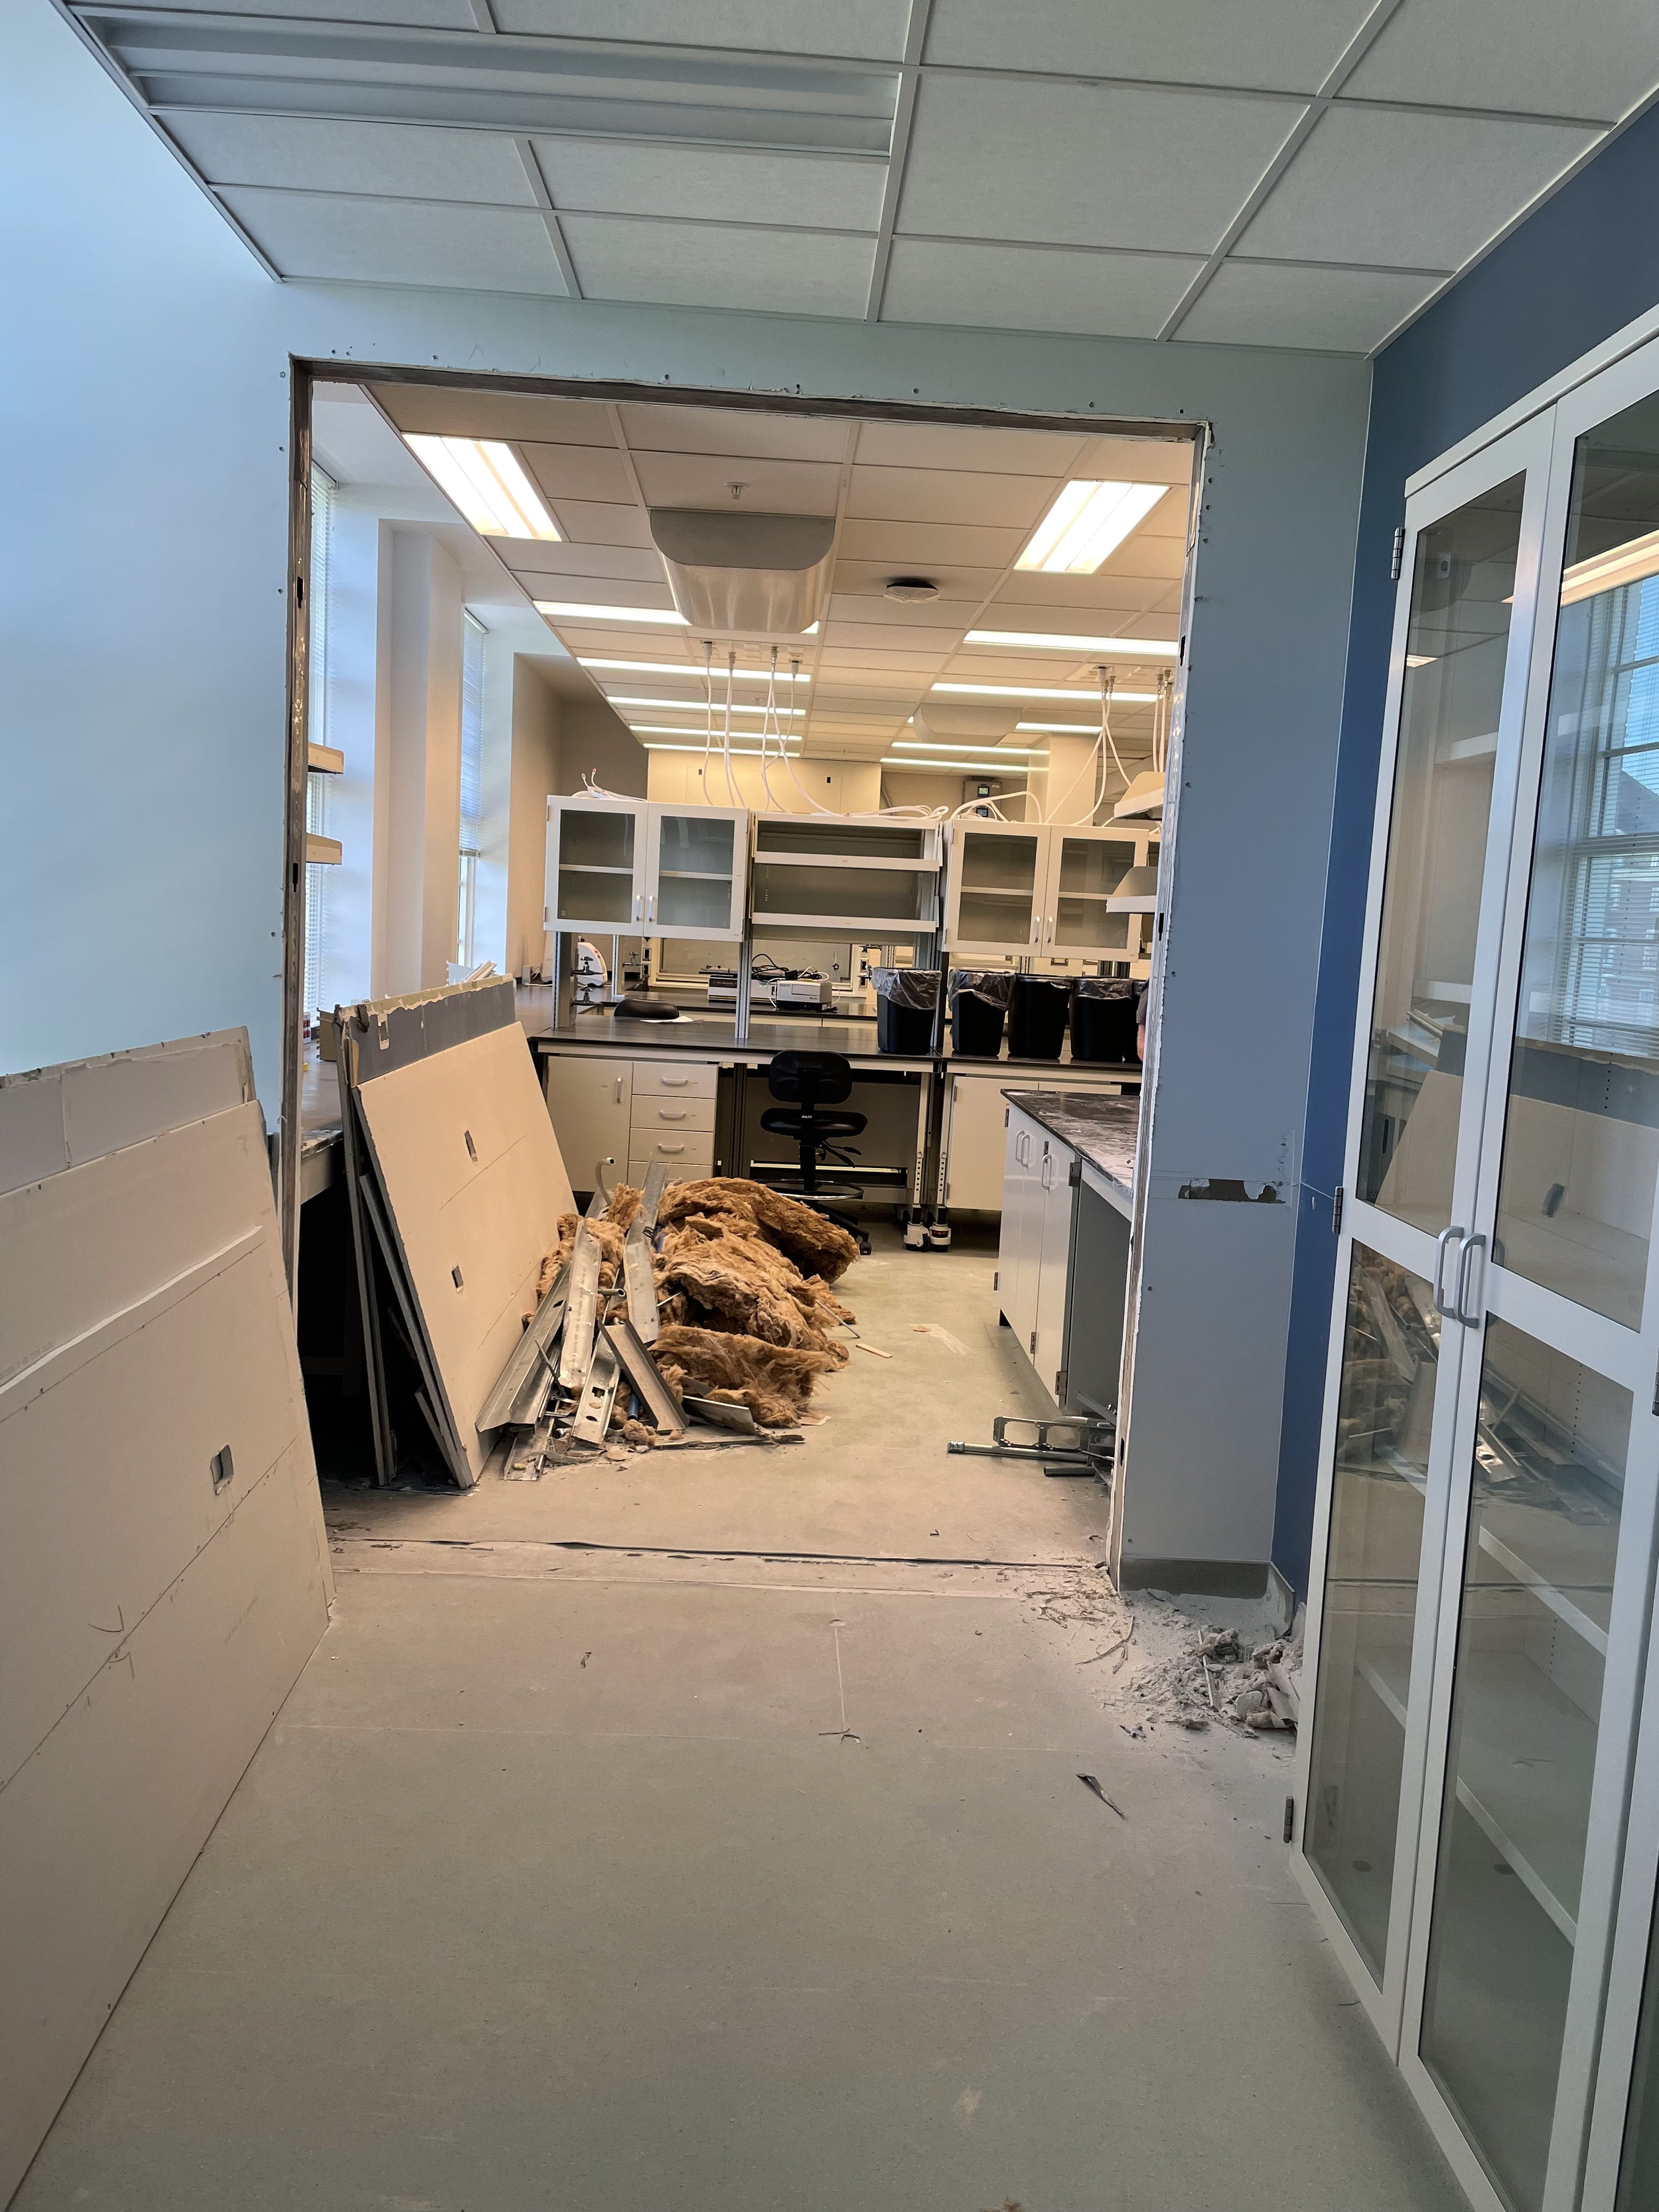 New lab space - big hole in the wall (2022)